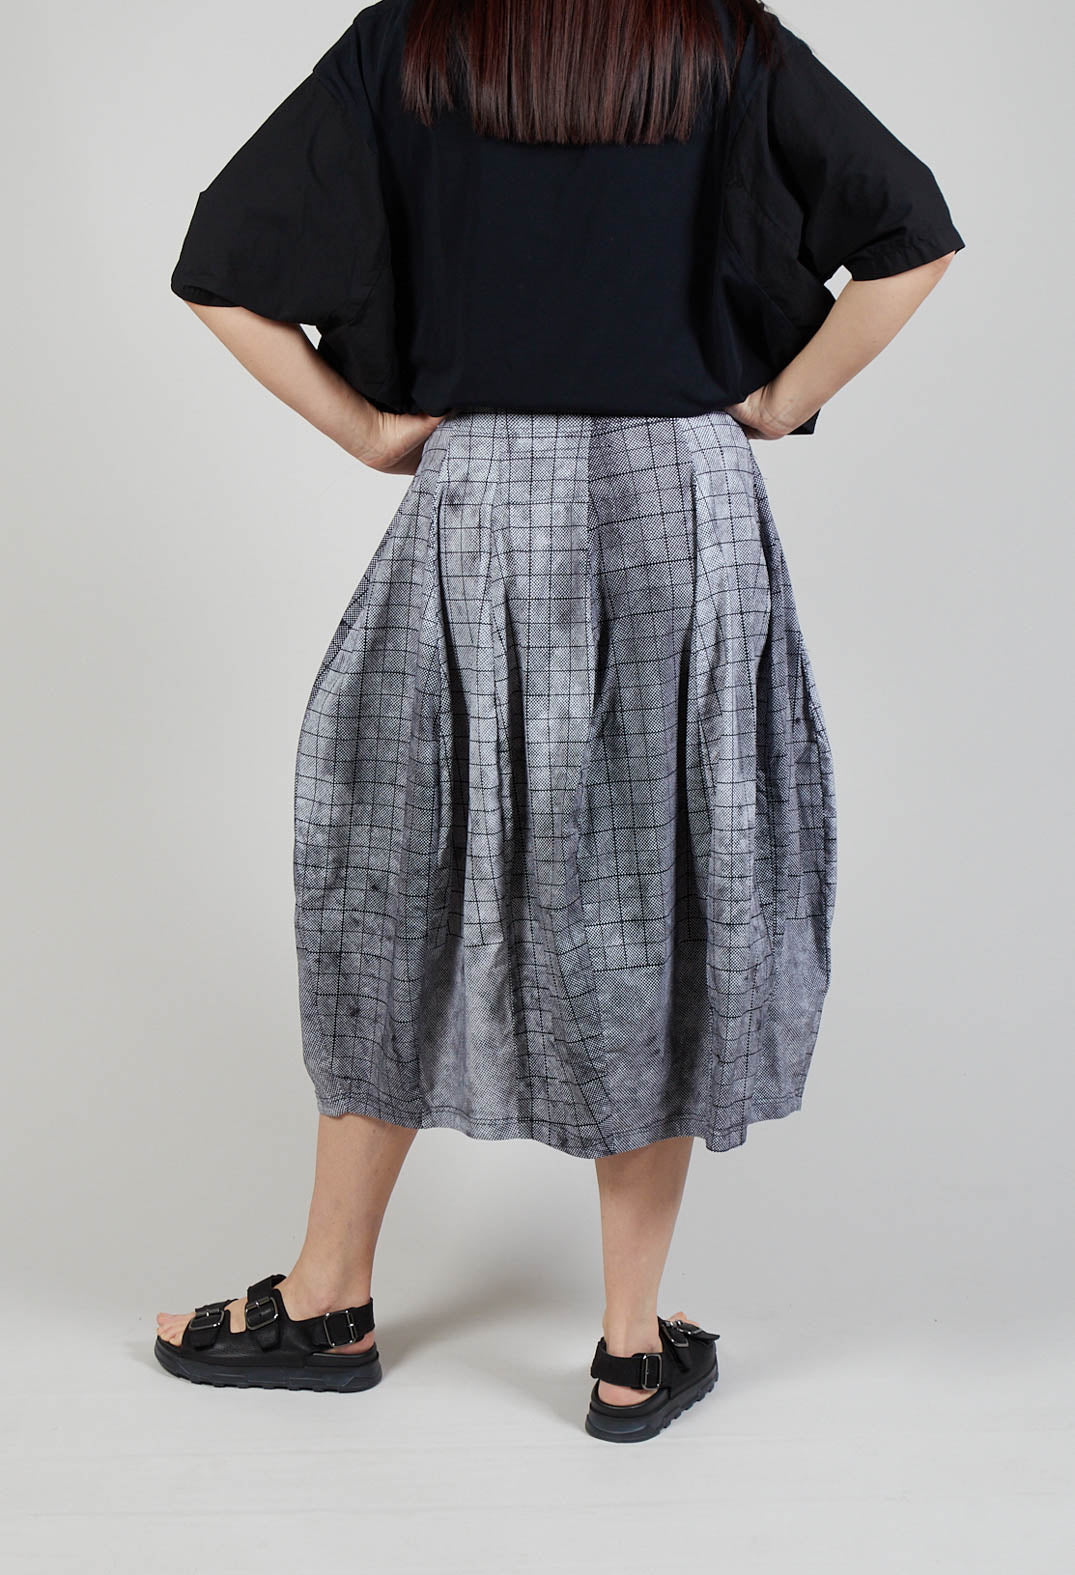 Pull On Tulip Skirt in Placed Black Print